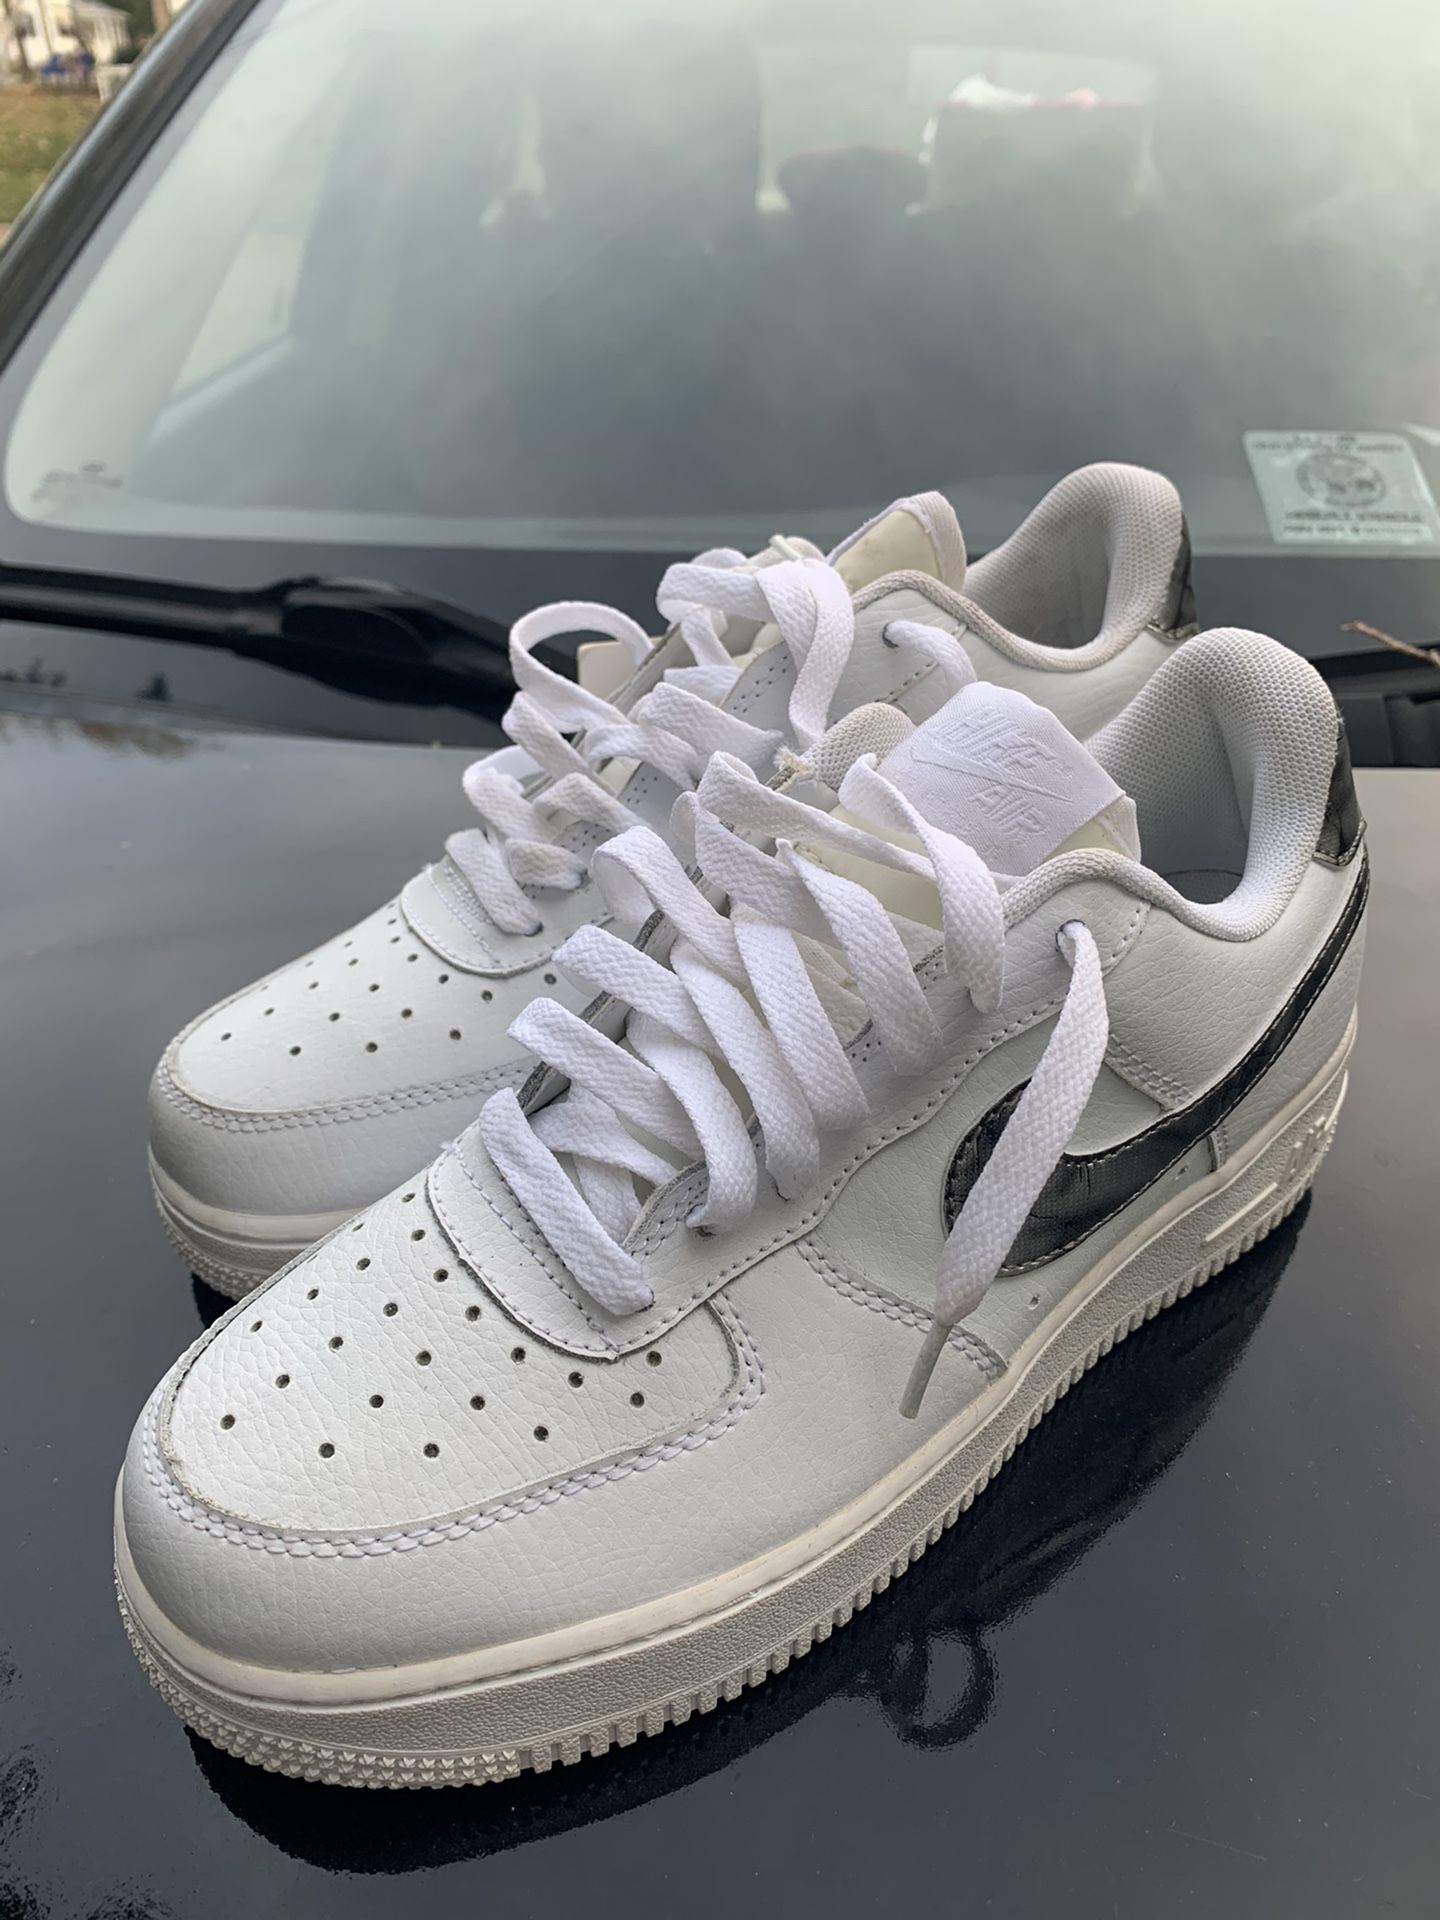 Nike Air Force 1 size 8